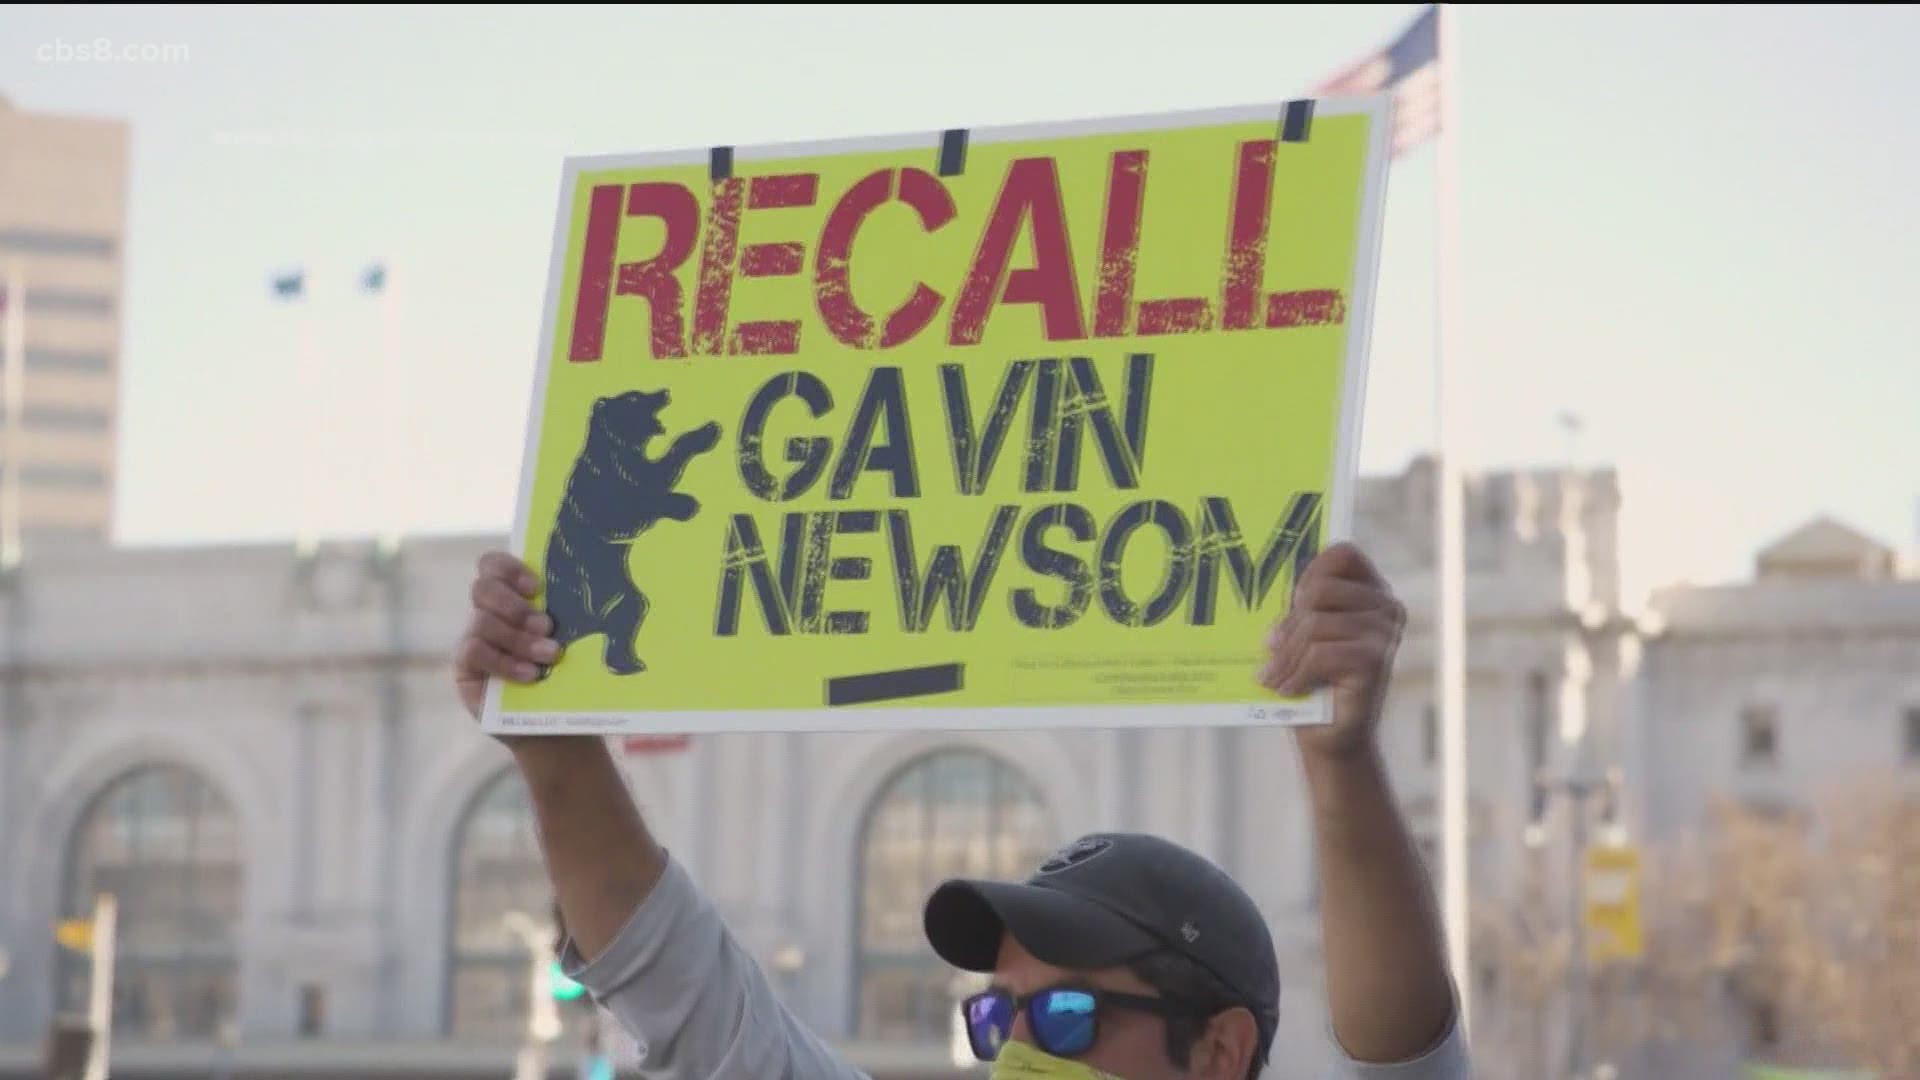 Governor Newsom said he will fight the recall effort.